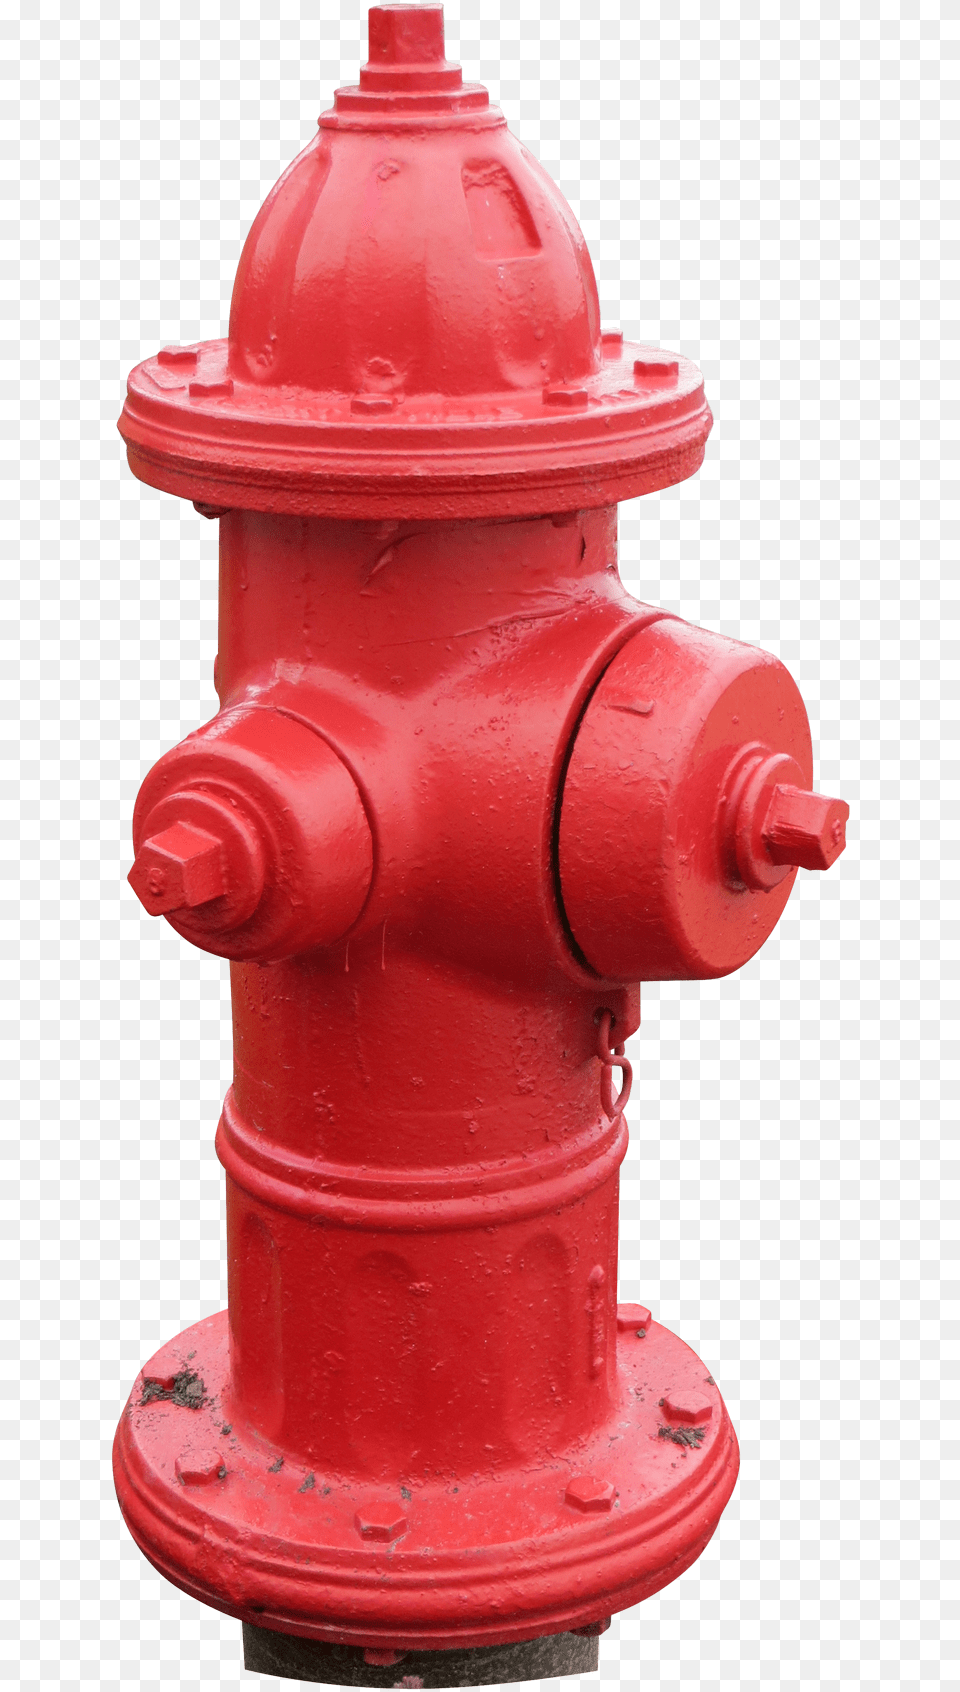 Fire Hydrant Purepng Transparent Cc0, Fire Hydrant Free Png